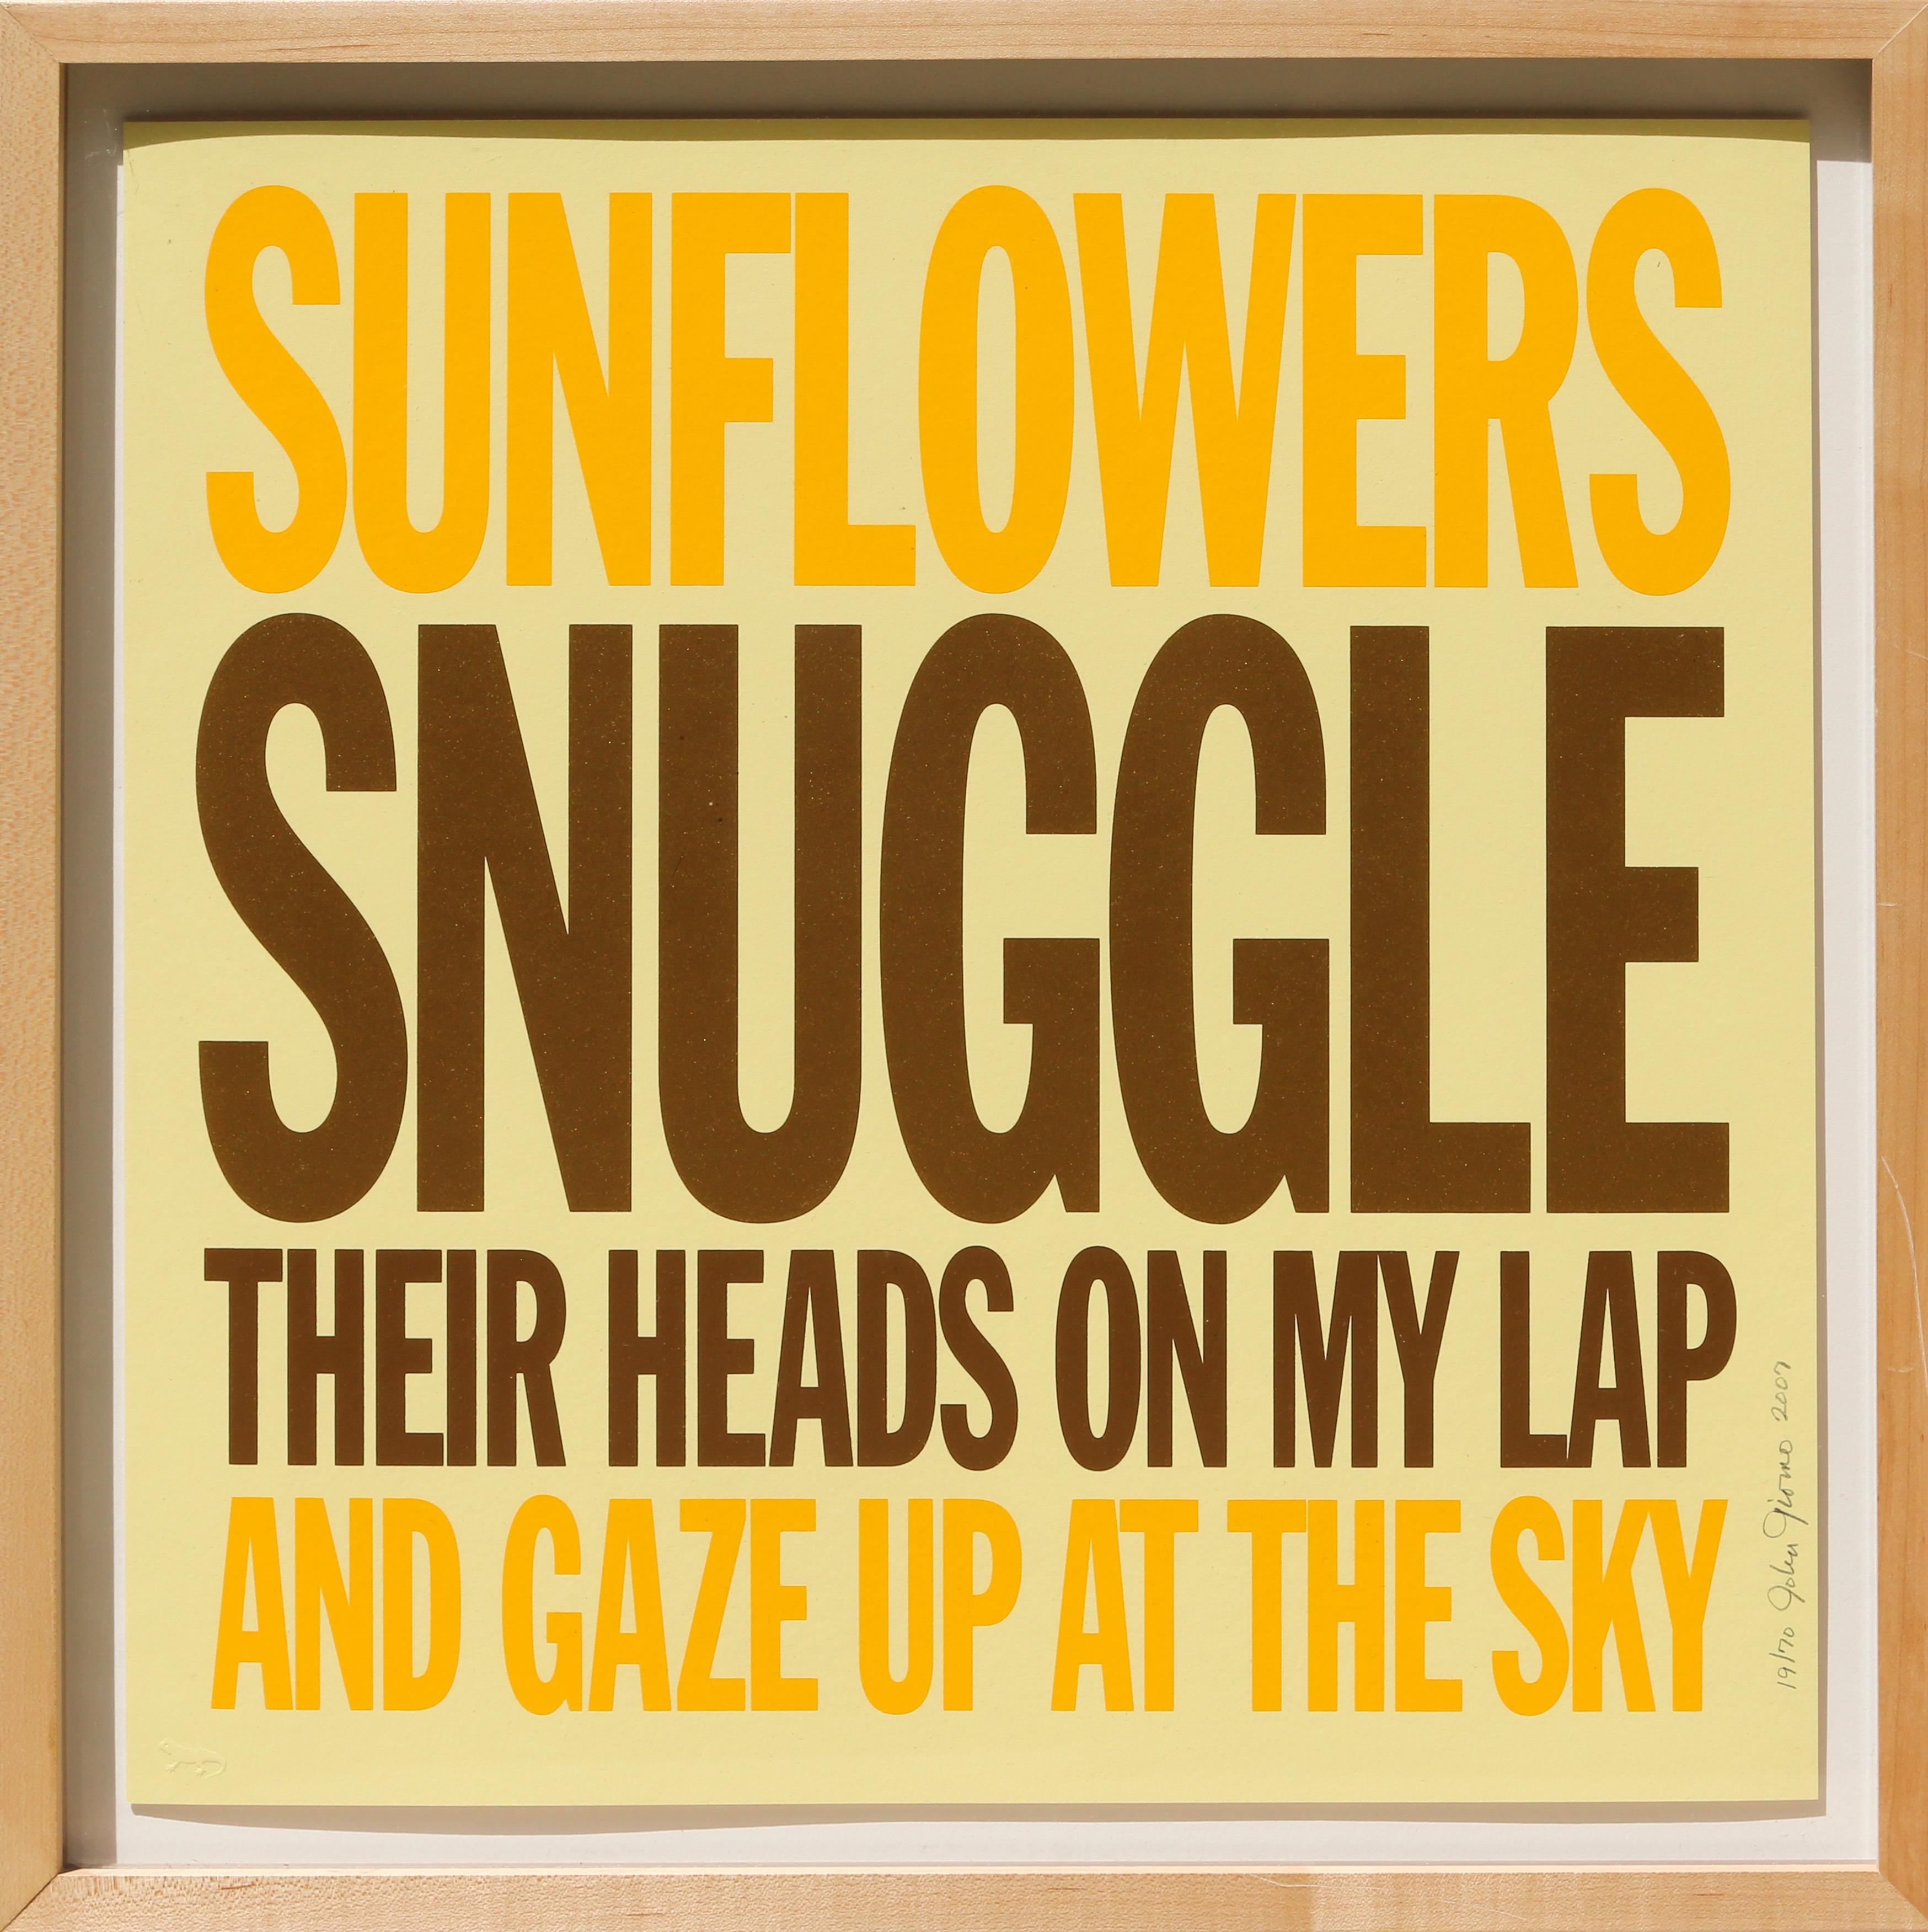 Artist: John Giorno
Title: Sunflowers Snuggle Their Heads On My Lap And Gaze Up at the Sky 
Portfolio: Welcoming the Flowers
Date: 2007
Screenprint, signed, numbered, and dated in pencil
Edition of 19/70
Size: 16.5 x 16.5 in. (41.91 x 41.91